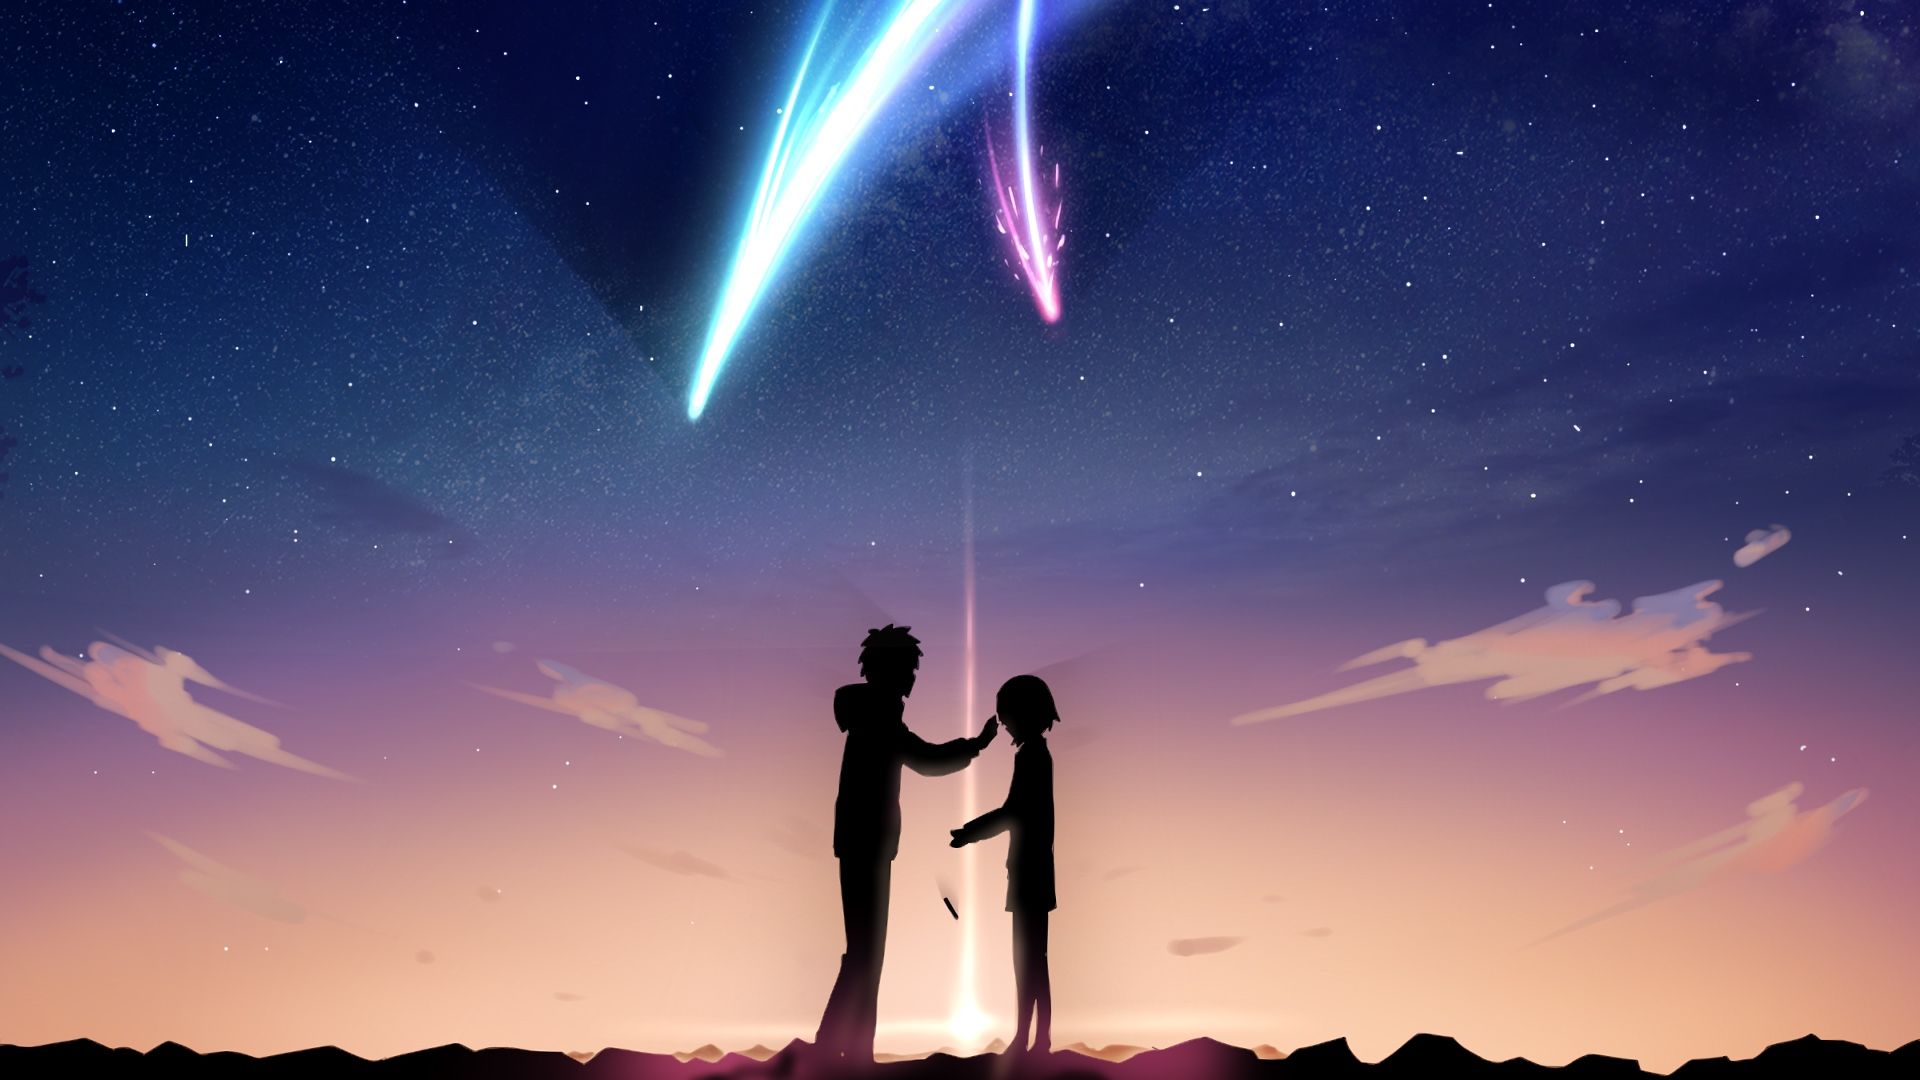 Your Name Anime HD Wallpapers - Wallpaper Cave